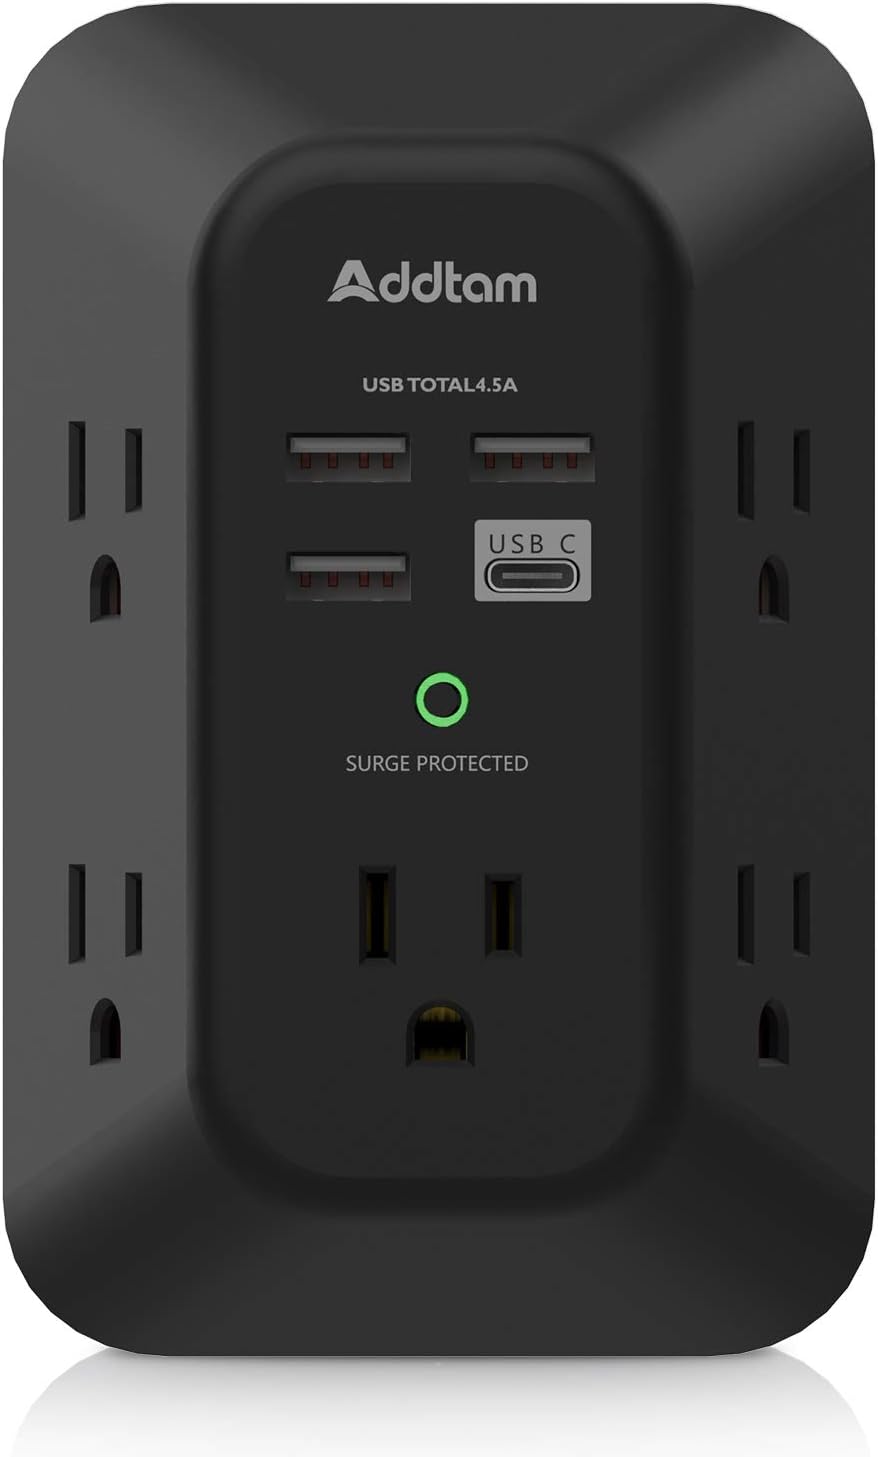 USB Wall Charger Surge Protector – Addtam 5 Outlet Extender with 4 USB Charging Ports (1 USB C), 3-Sided 1800J Power Strip Multi Plug Outlets Adapter Widely Spaced,Black